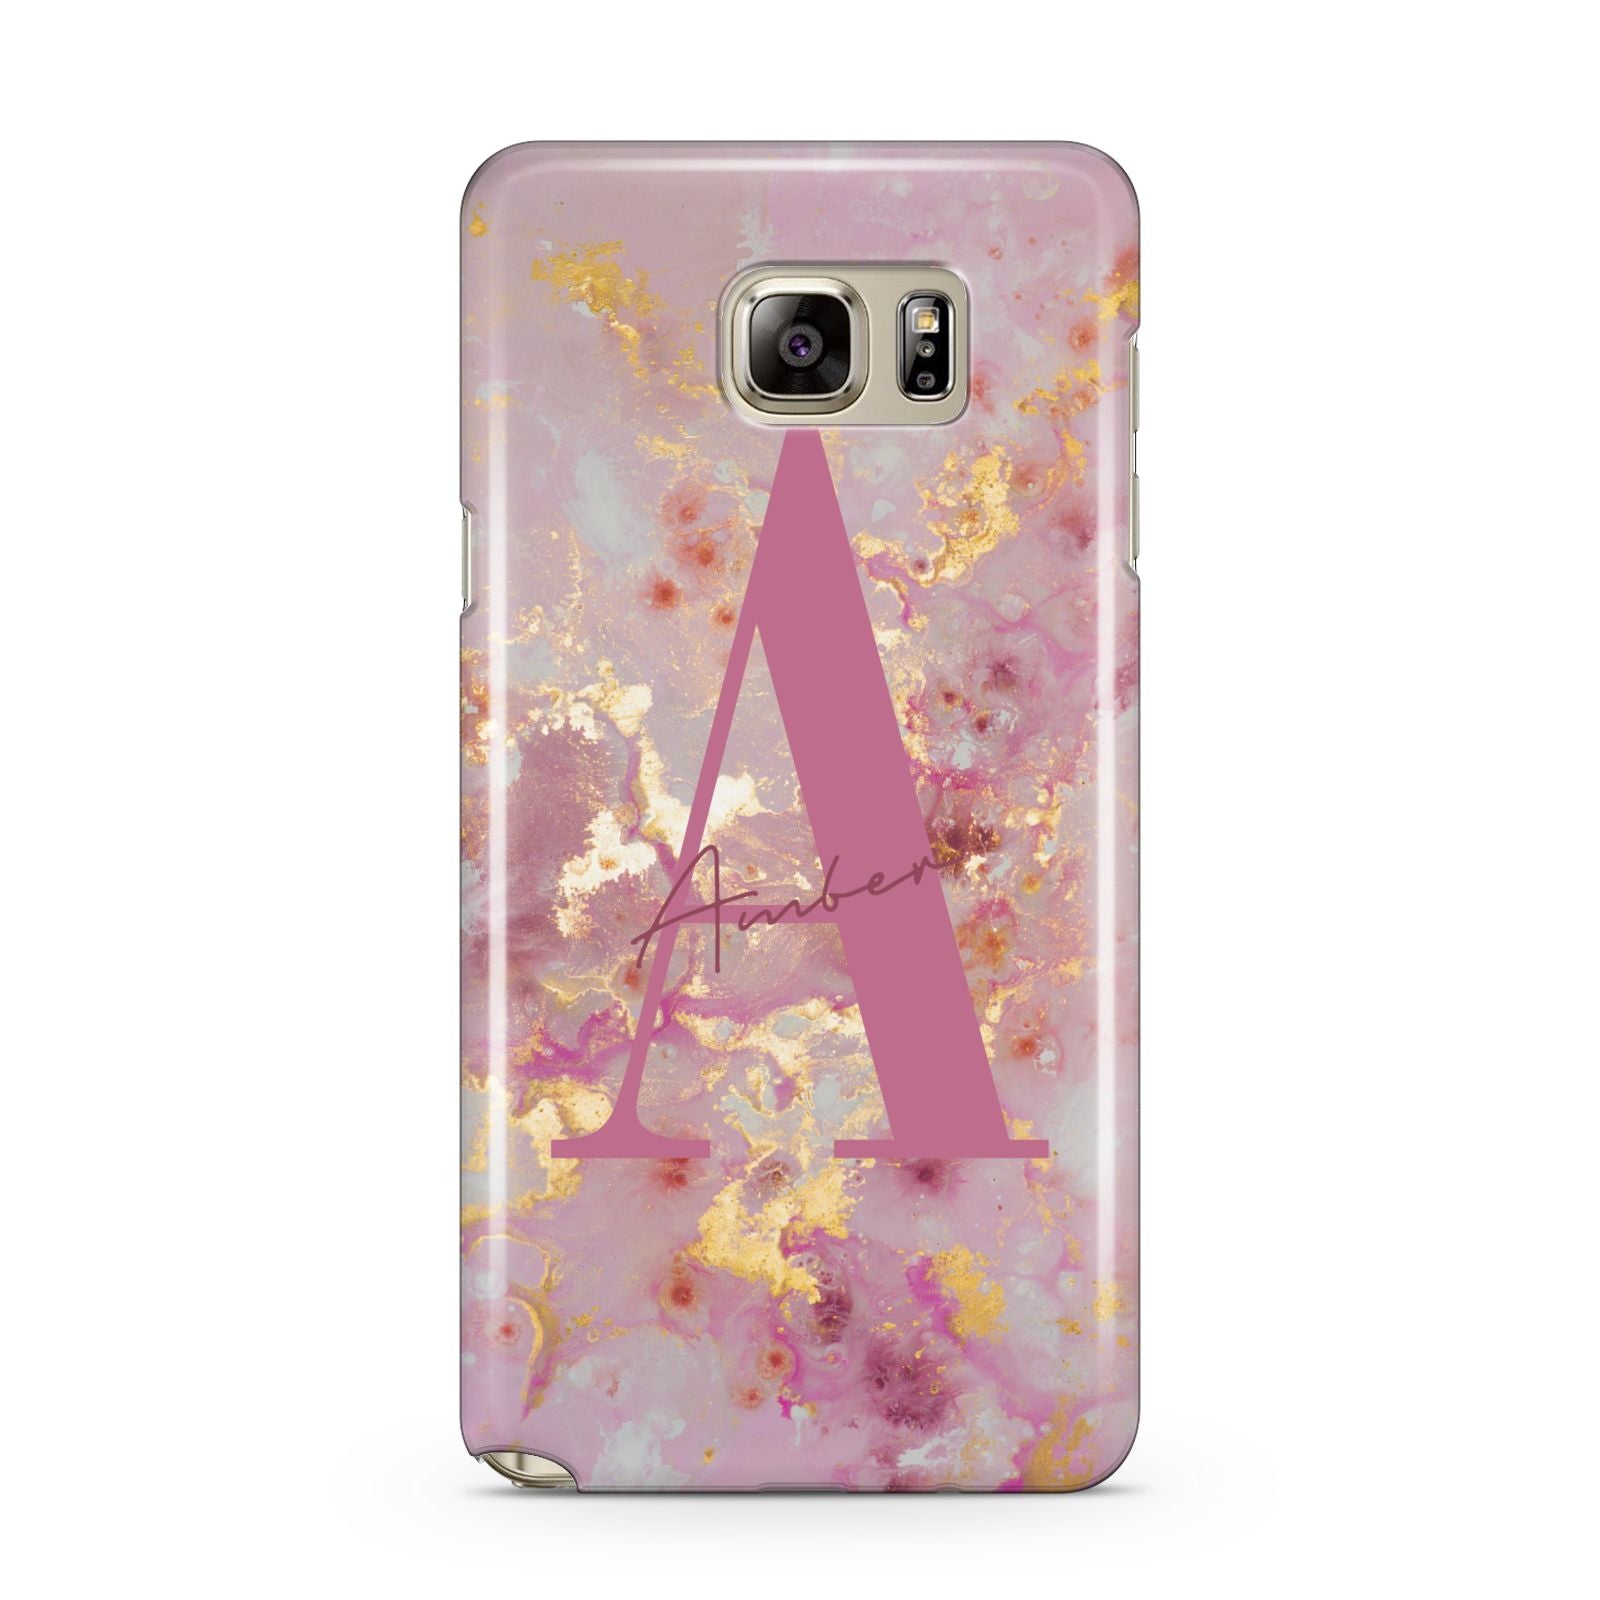 Monogrammed Pink Gold Marble Samsung Galaxy Note 5 Case